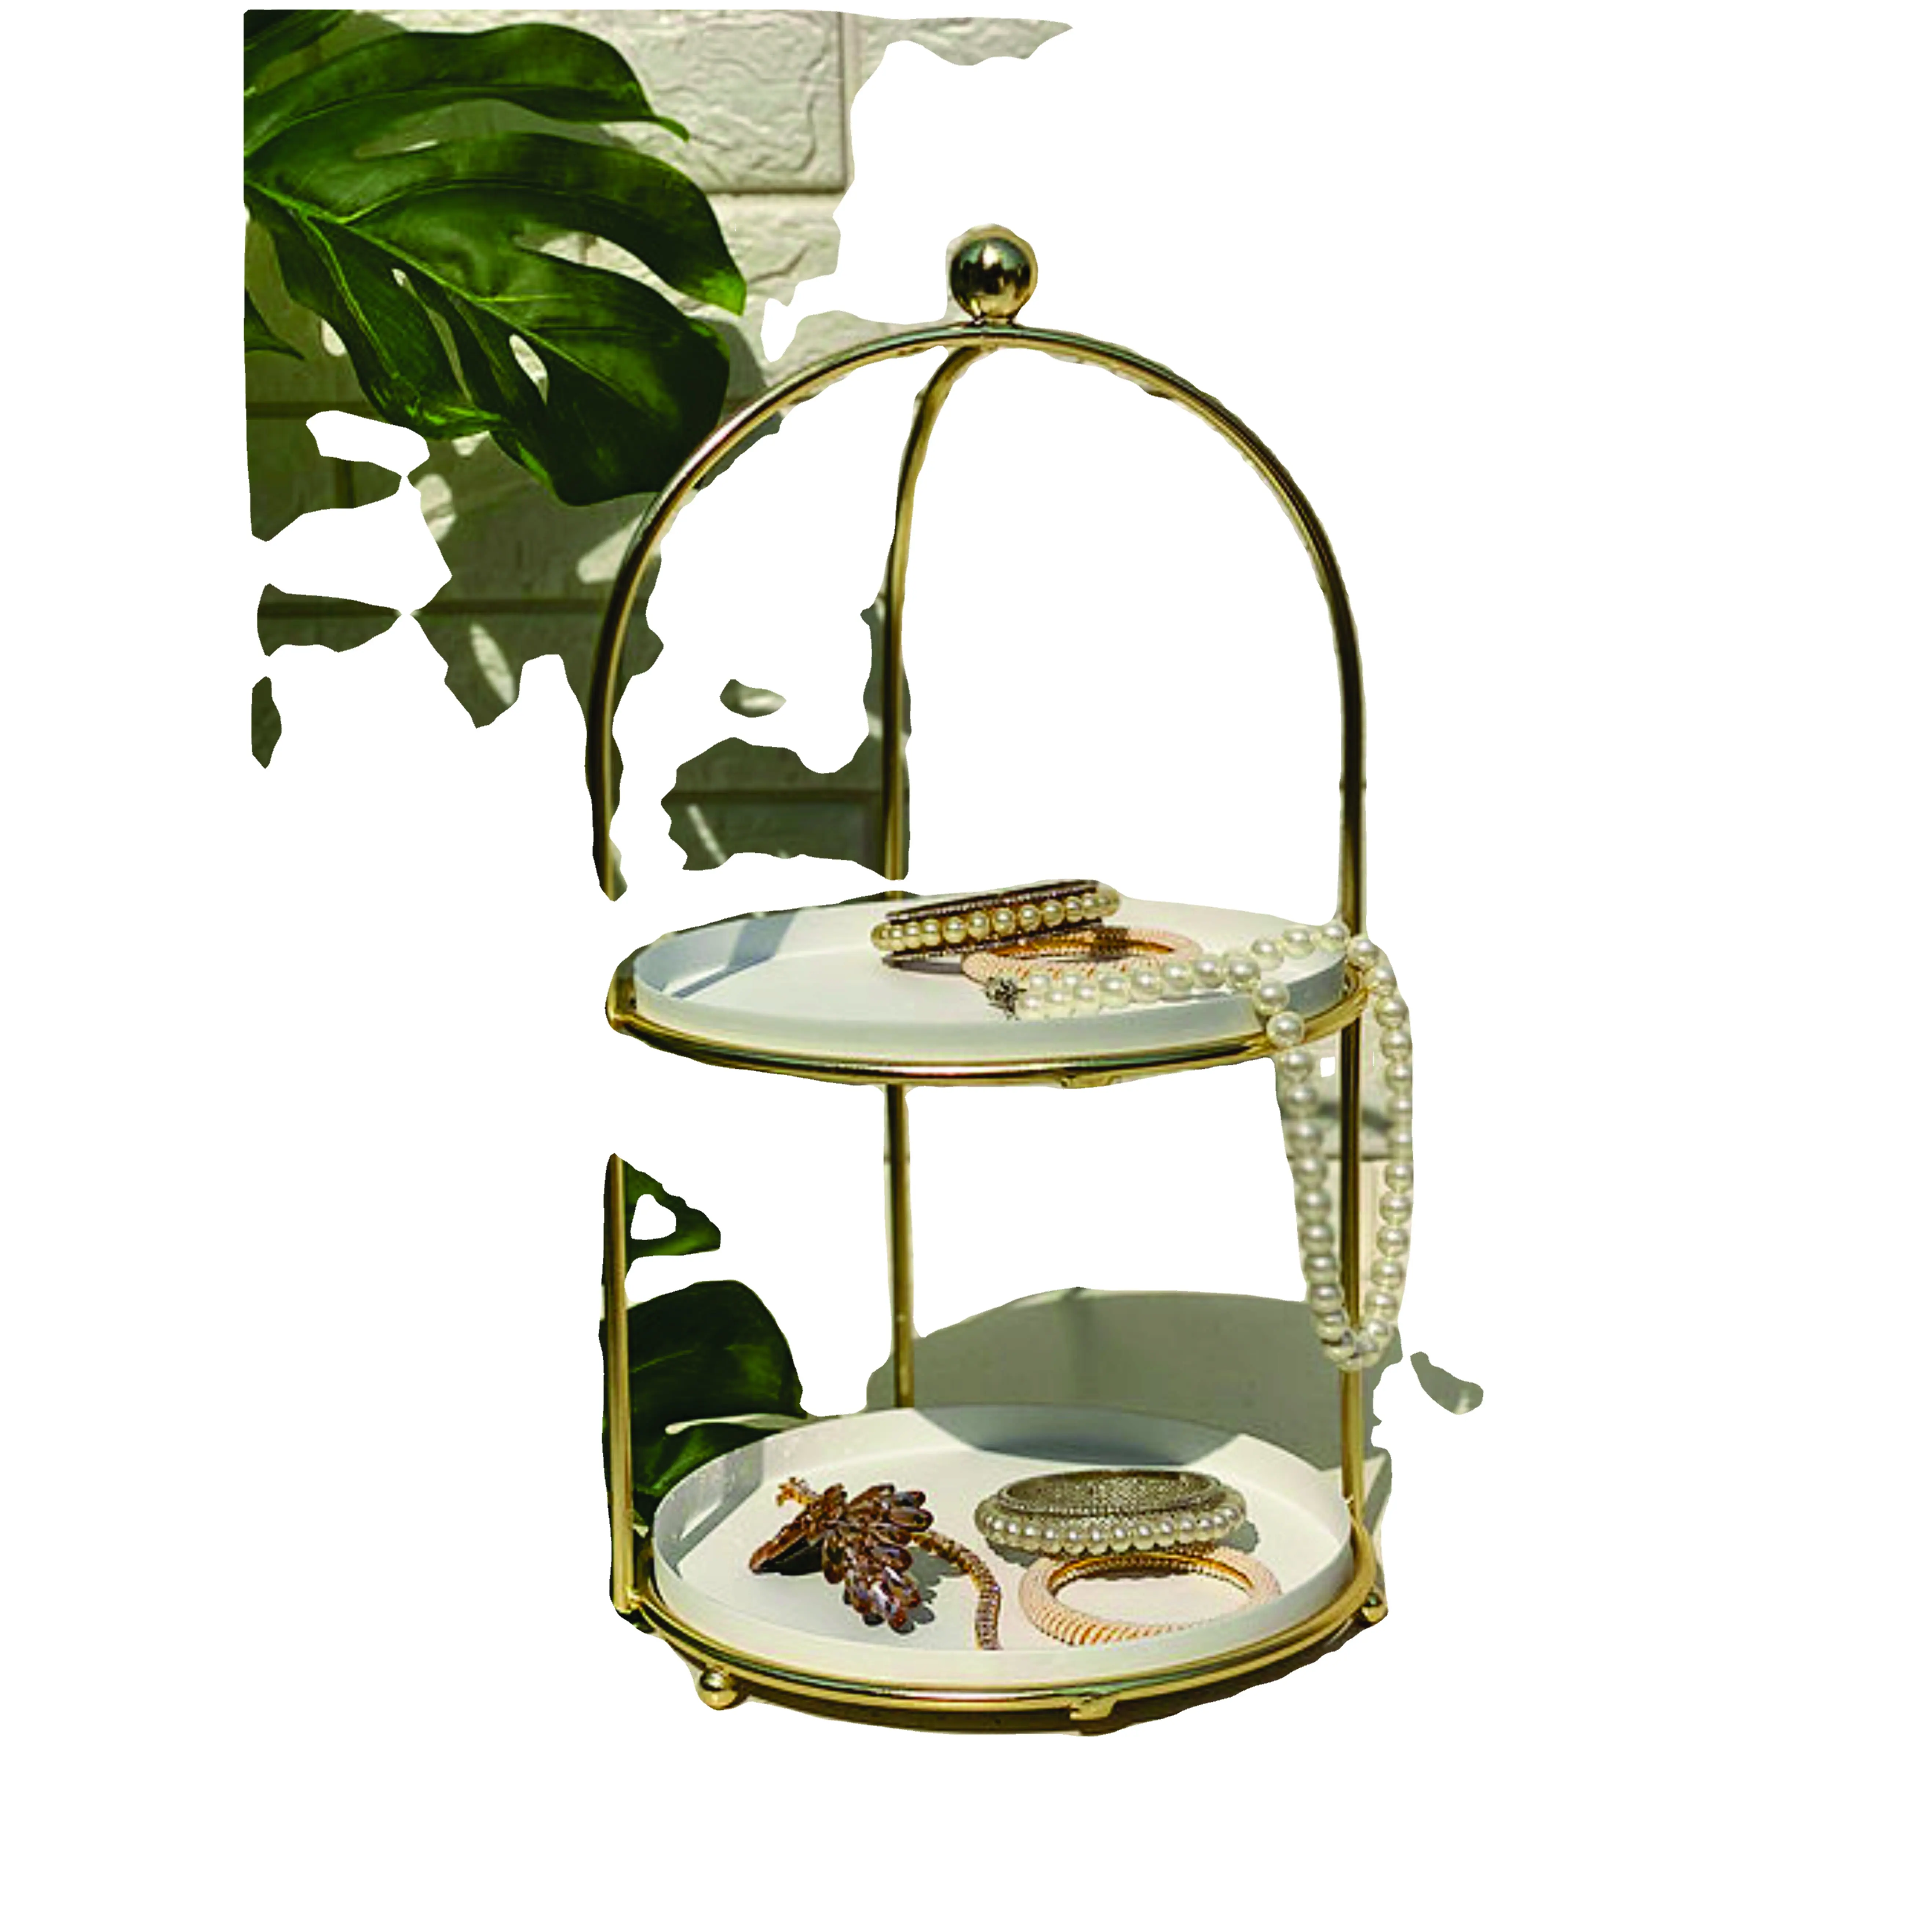 New Arrival 2 Tier Metal Display Cake Stands High Quality Handcrafted Cup Cake Display Food Safe Desert Platter Eco Friendly